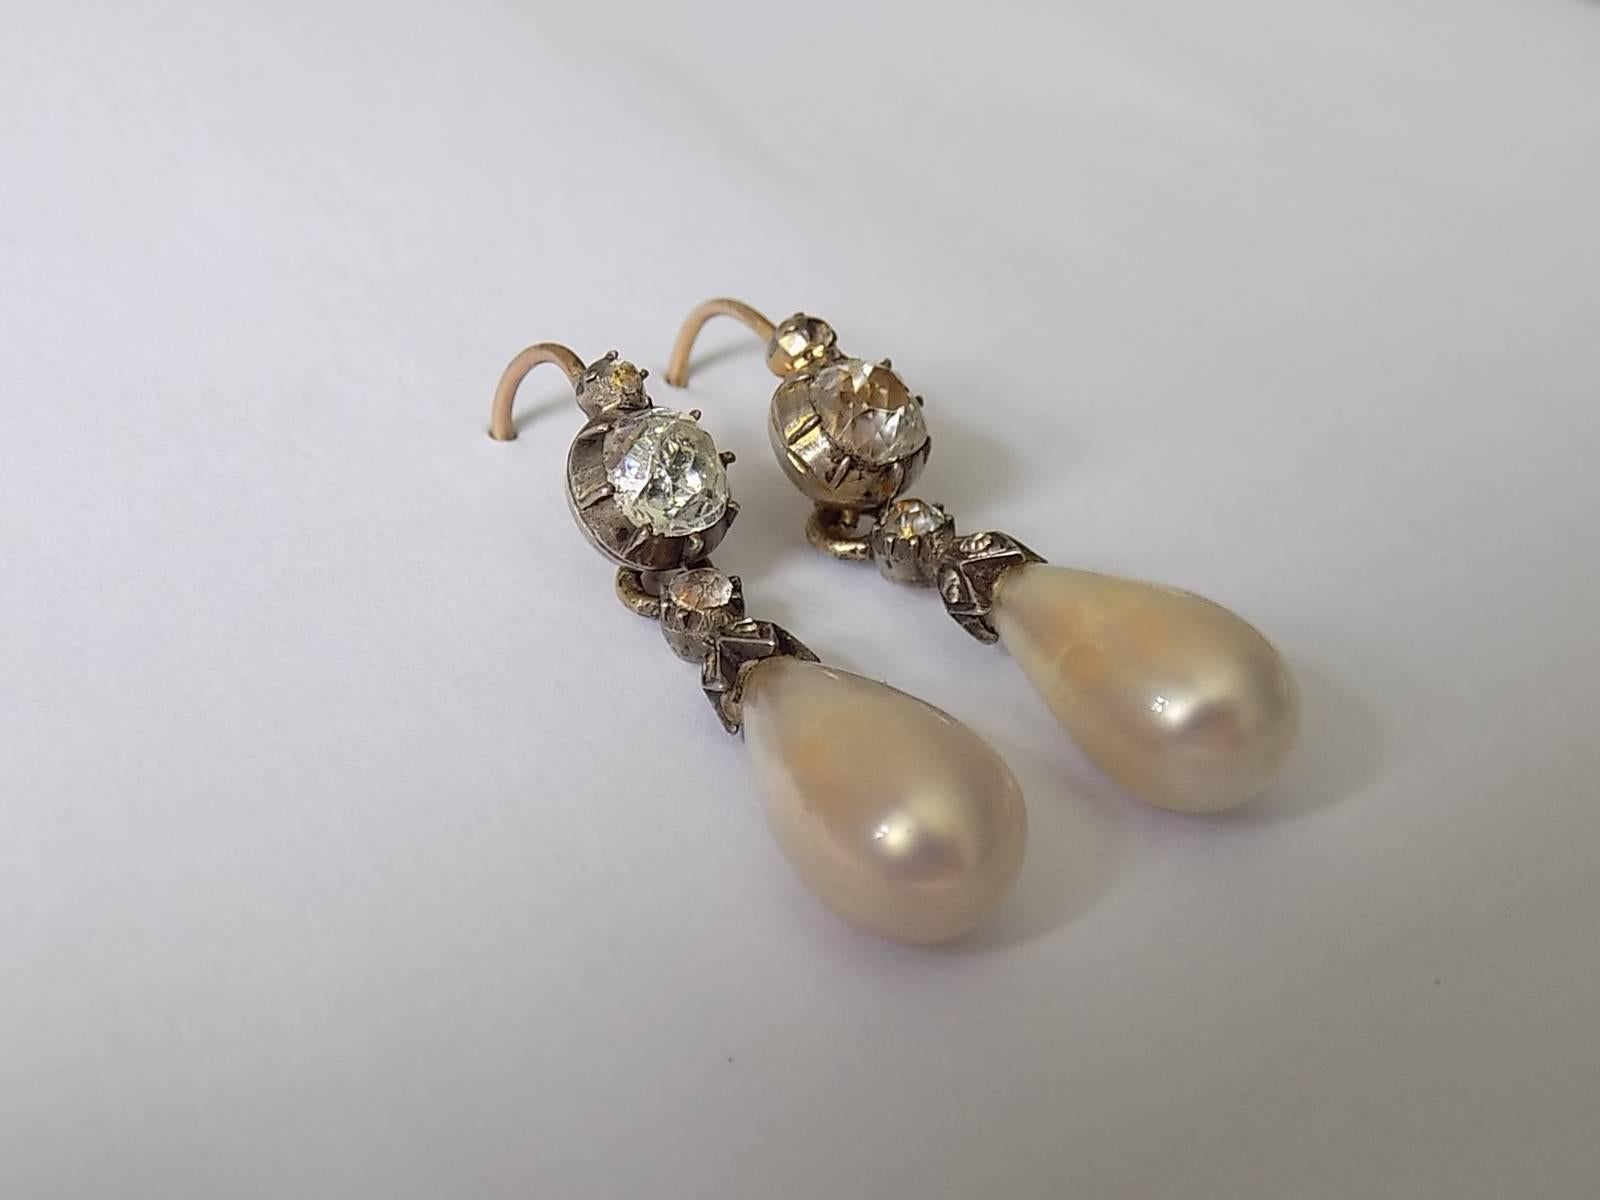 A Beautiful Antique Georgian c.1700s Yellow Gold, Silver and hand cut foil backed in closed back setting Paste drop earrings. The Pearl drops made of blown glass coated in nacre made from fish scale paste, giving them the effect of large natural